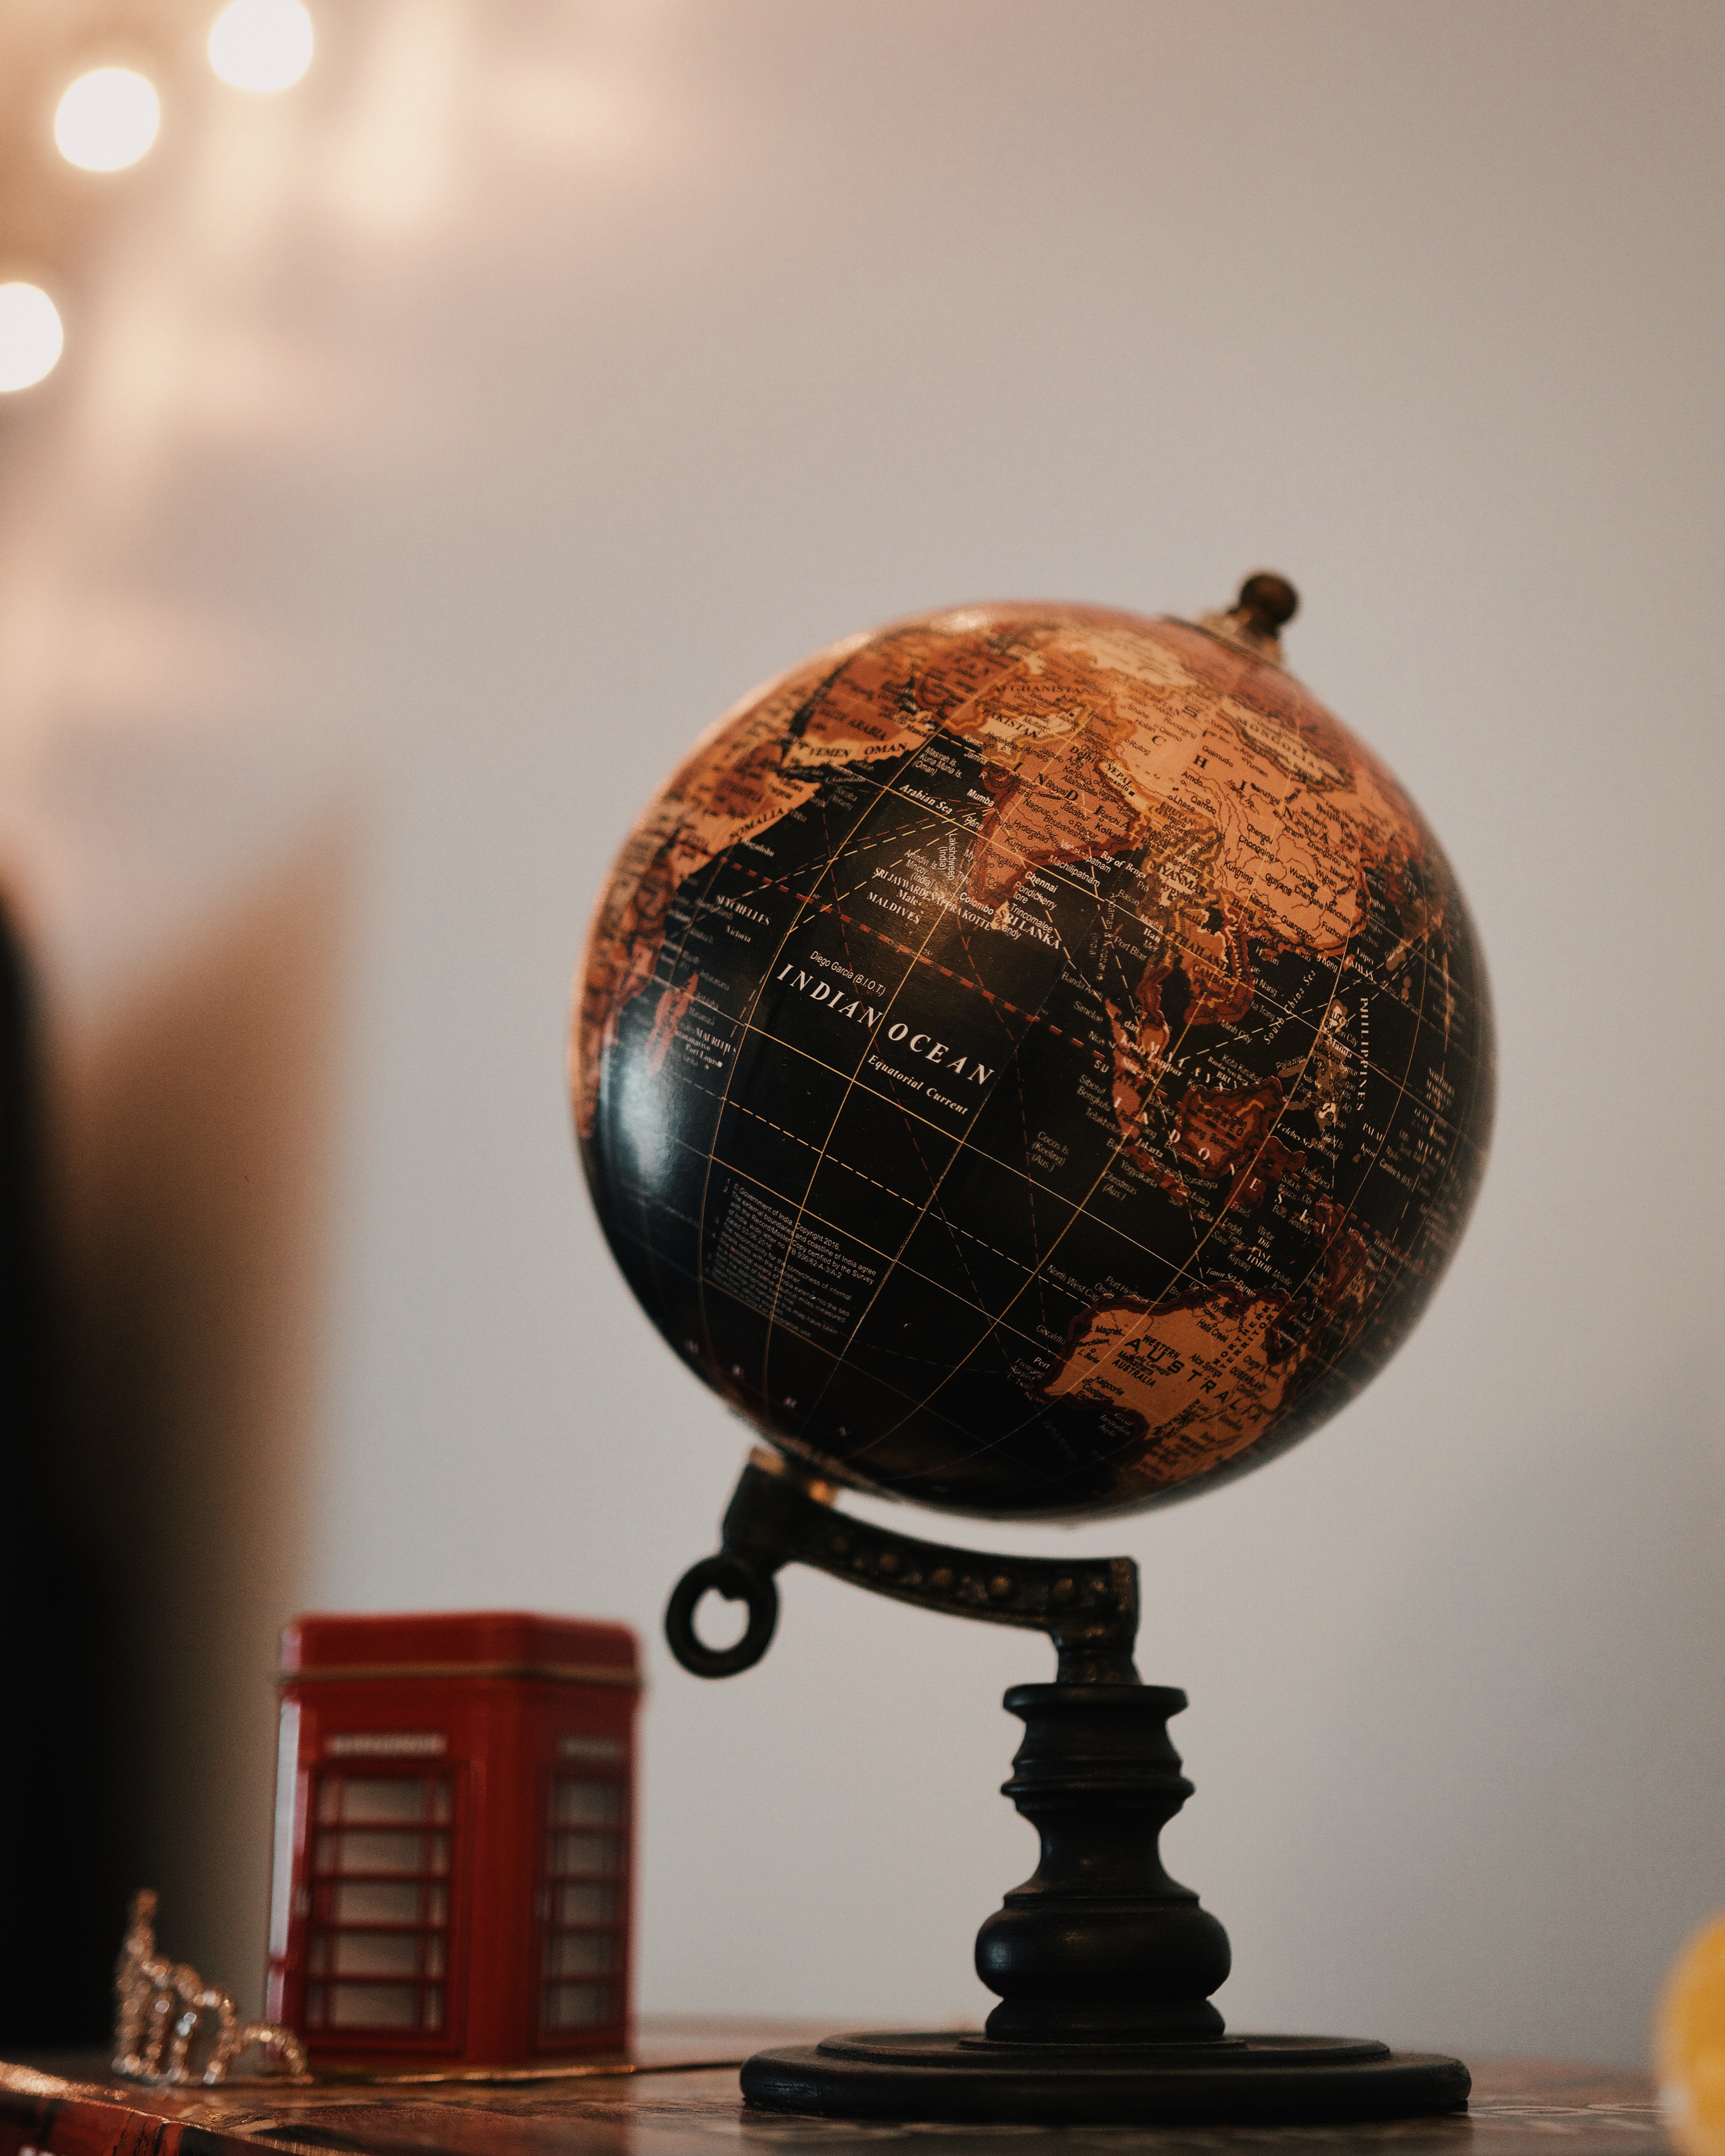 miscellanea, geography, miscellaneous, land, earth, ball, map, sphere, globe images